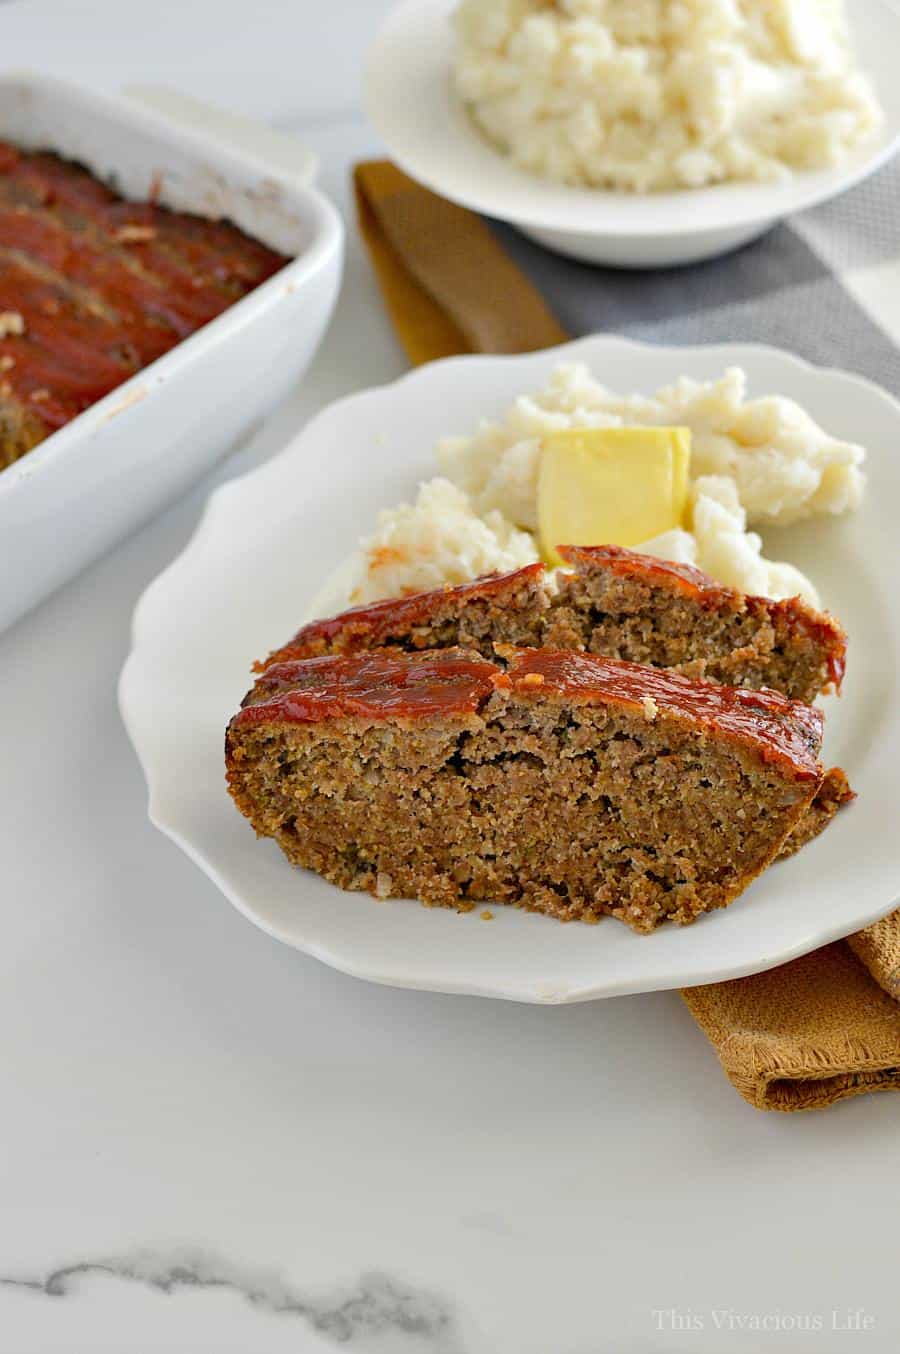 Two slices of meatloaf with ketchup on a white plate